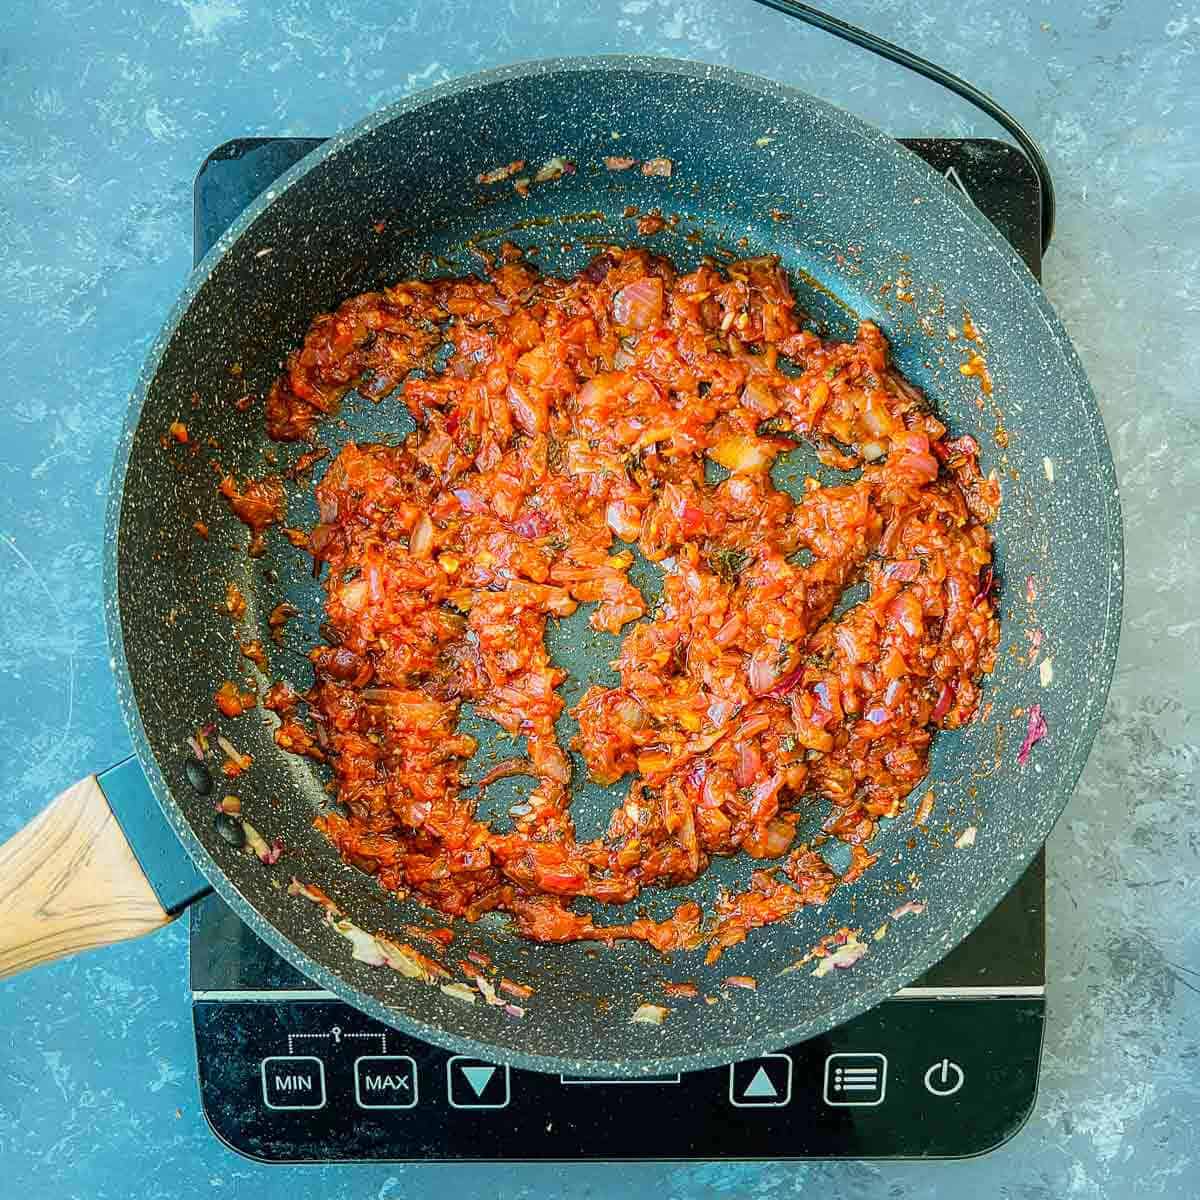 Tomato puree and spices cooked with onions.